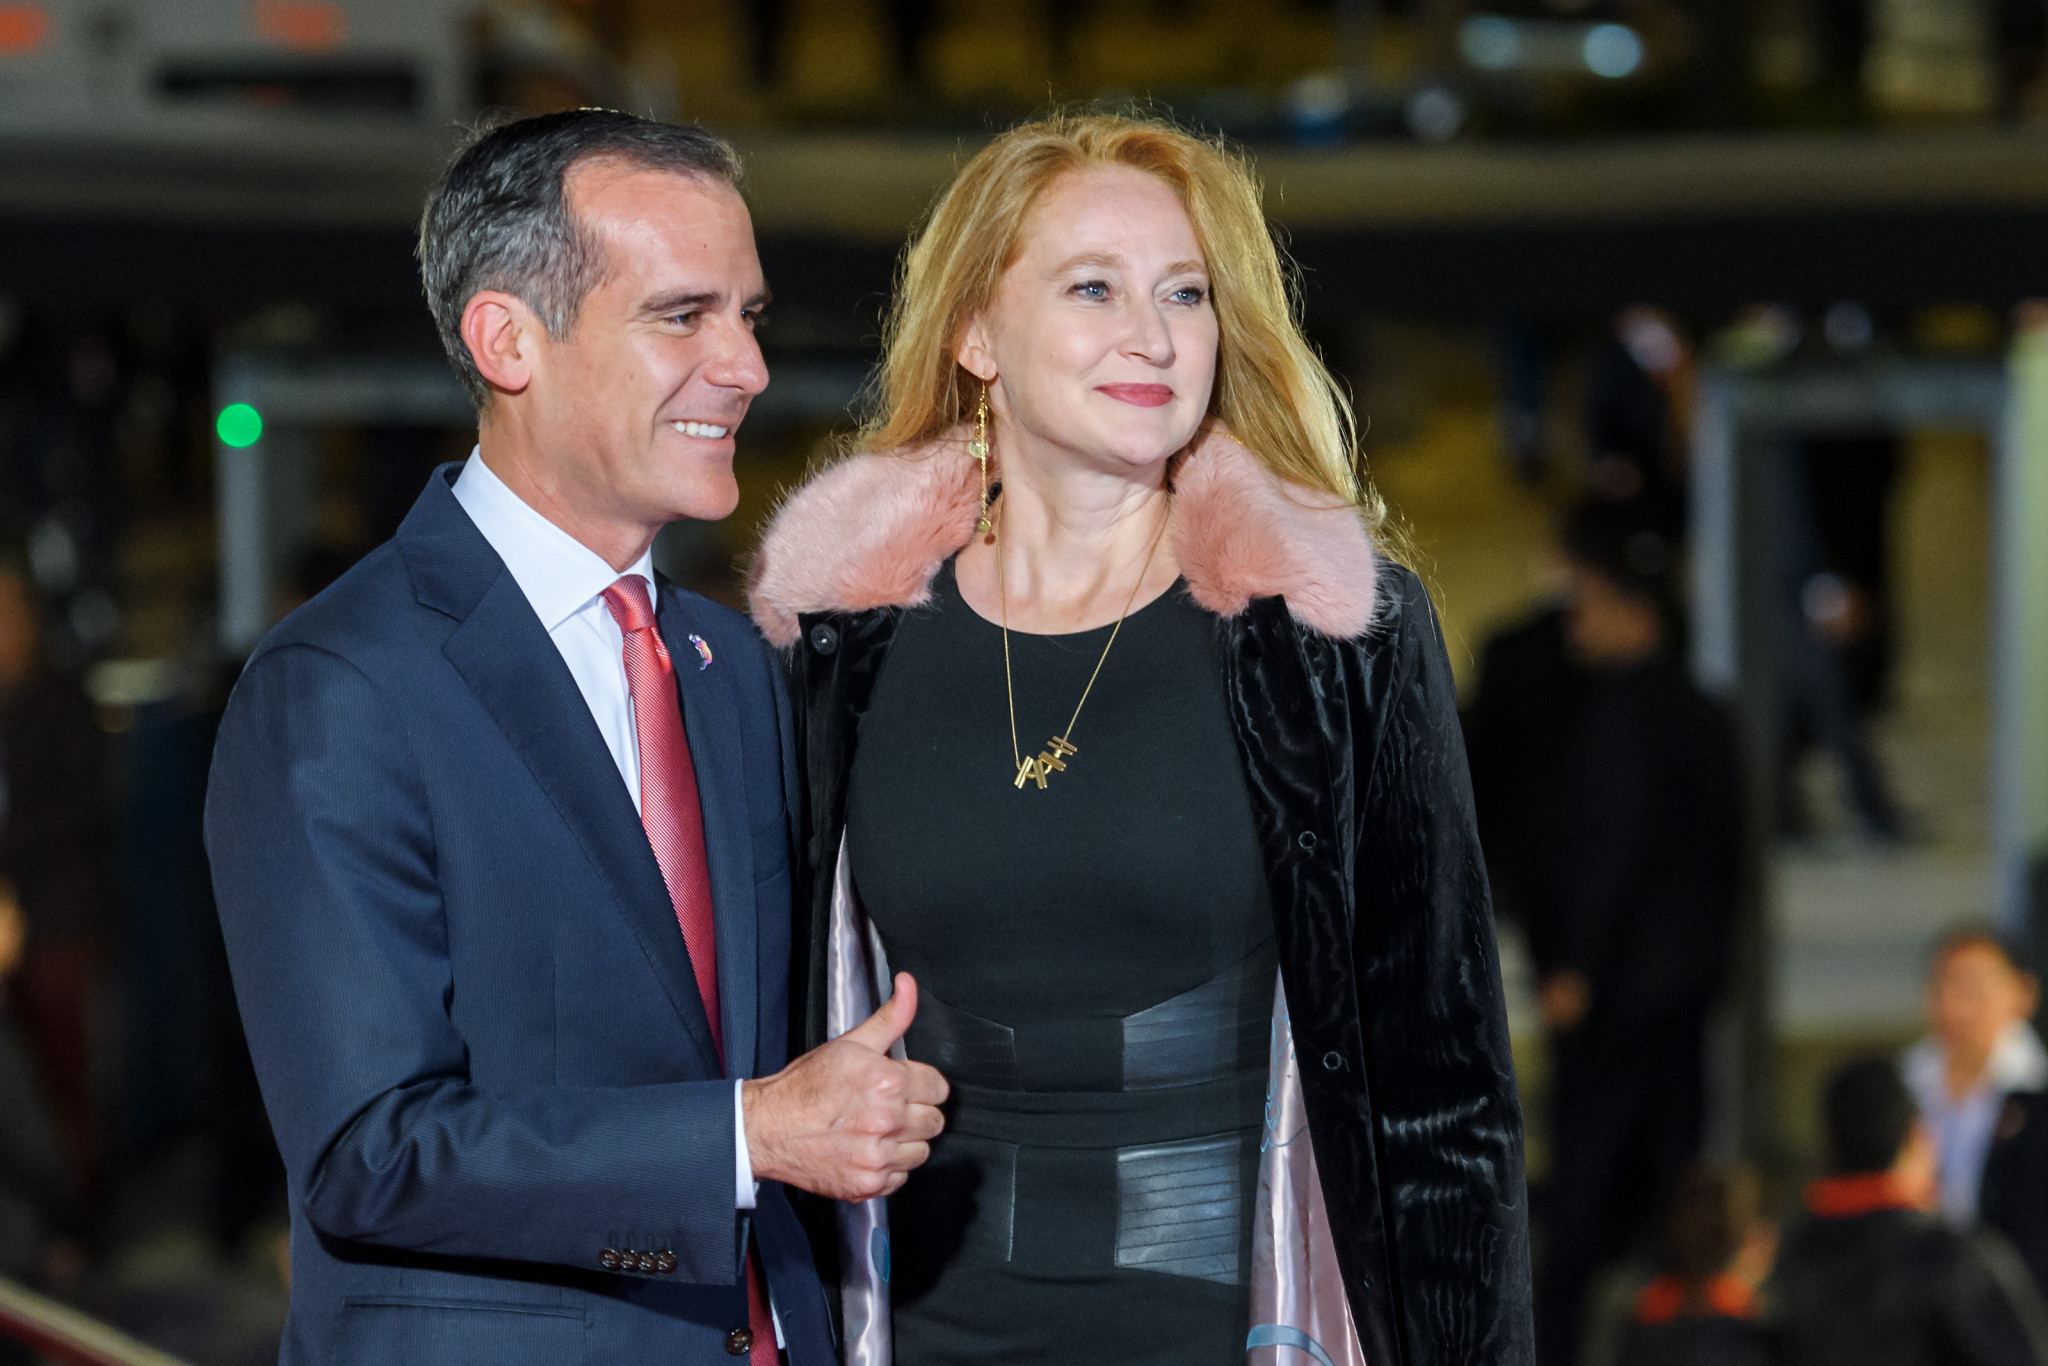 Los Angeles Mayor Eric Garcetti was also present prior to the city being awarded the 2028 Games ©Getty Images